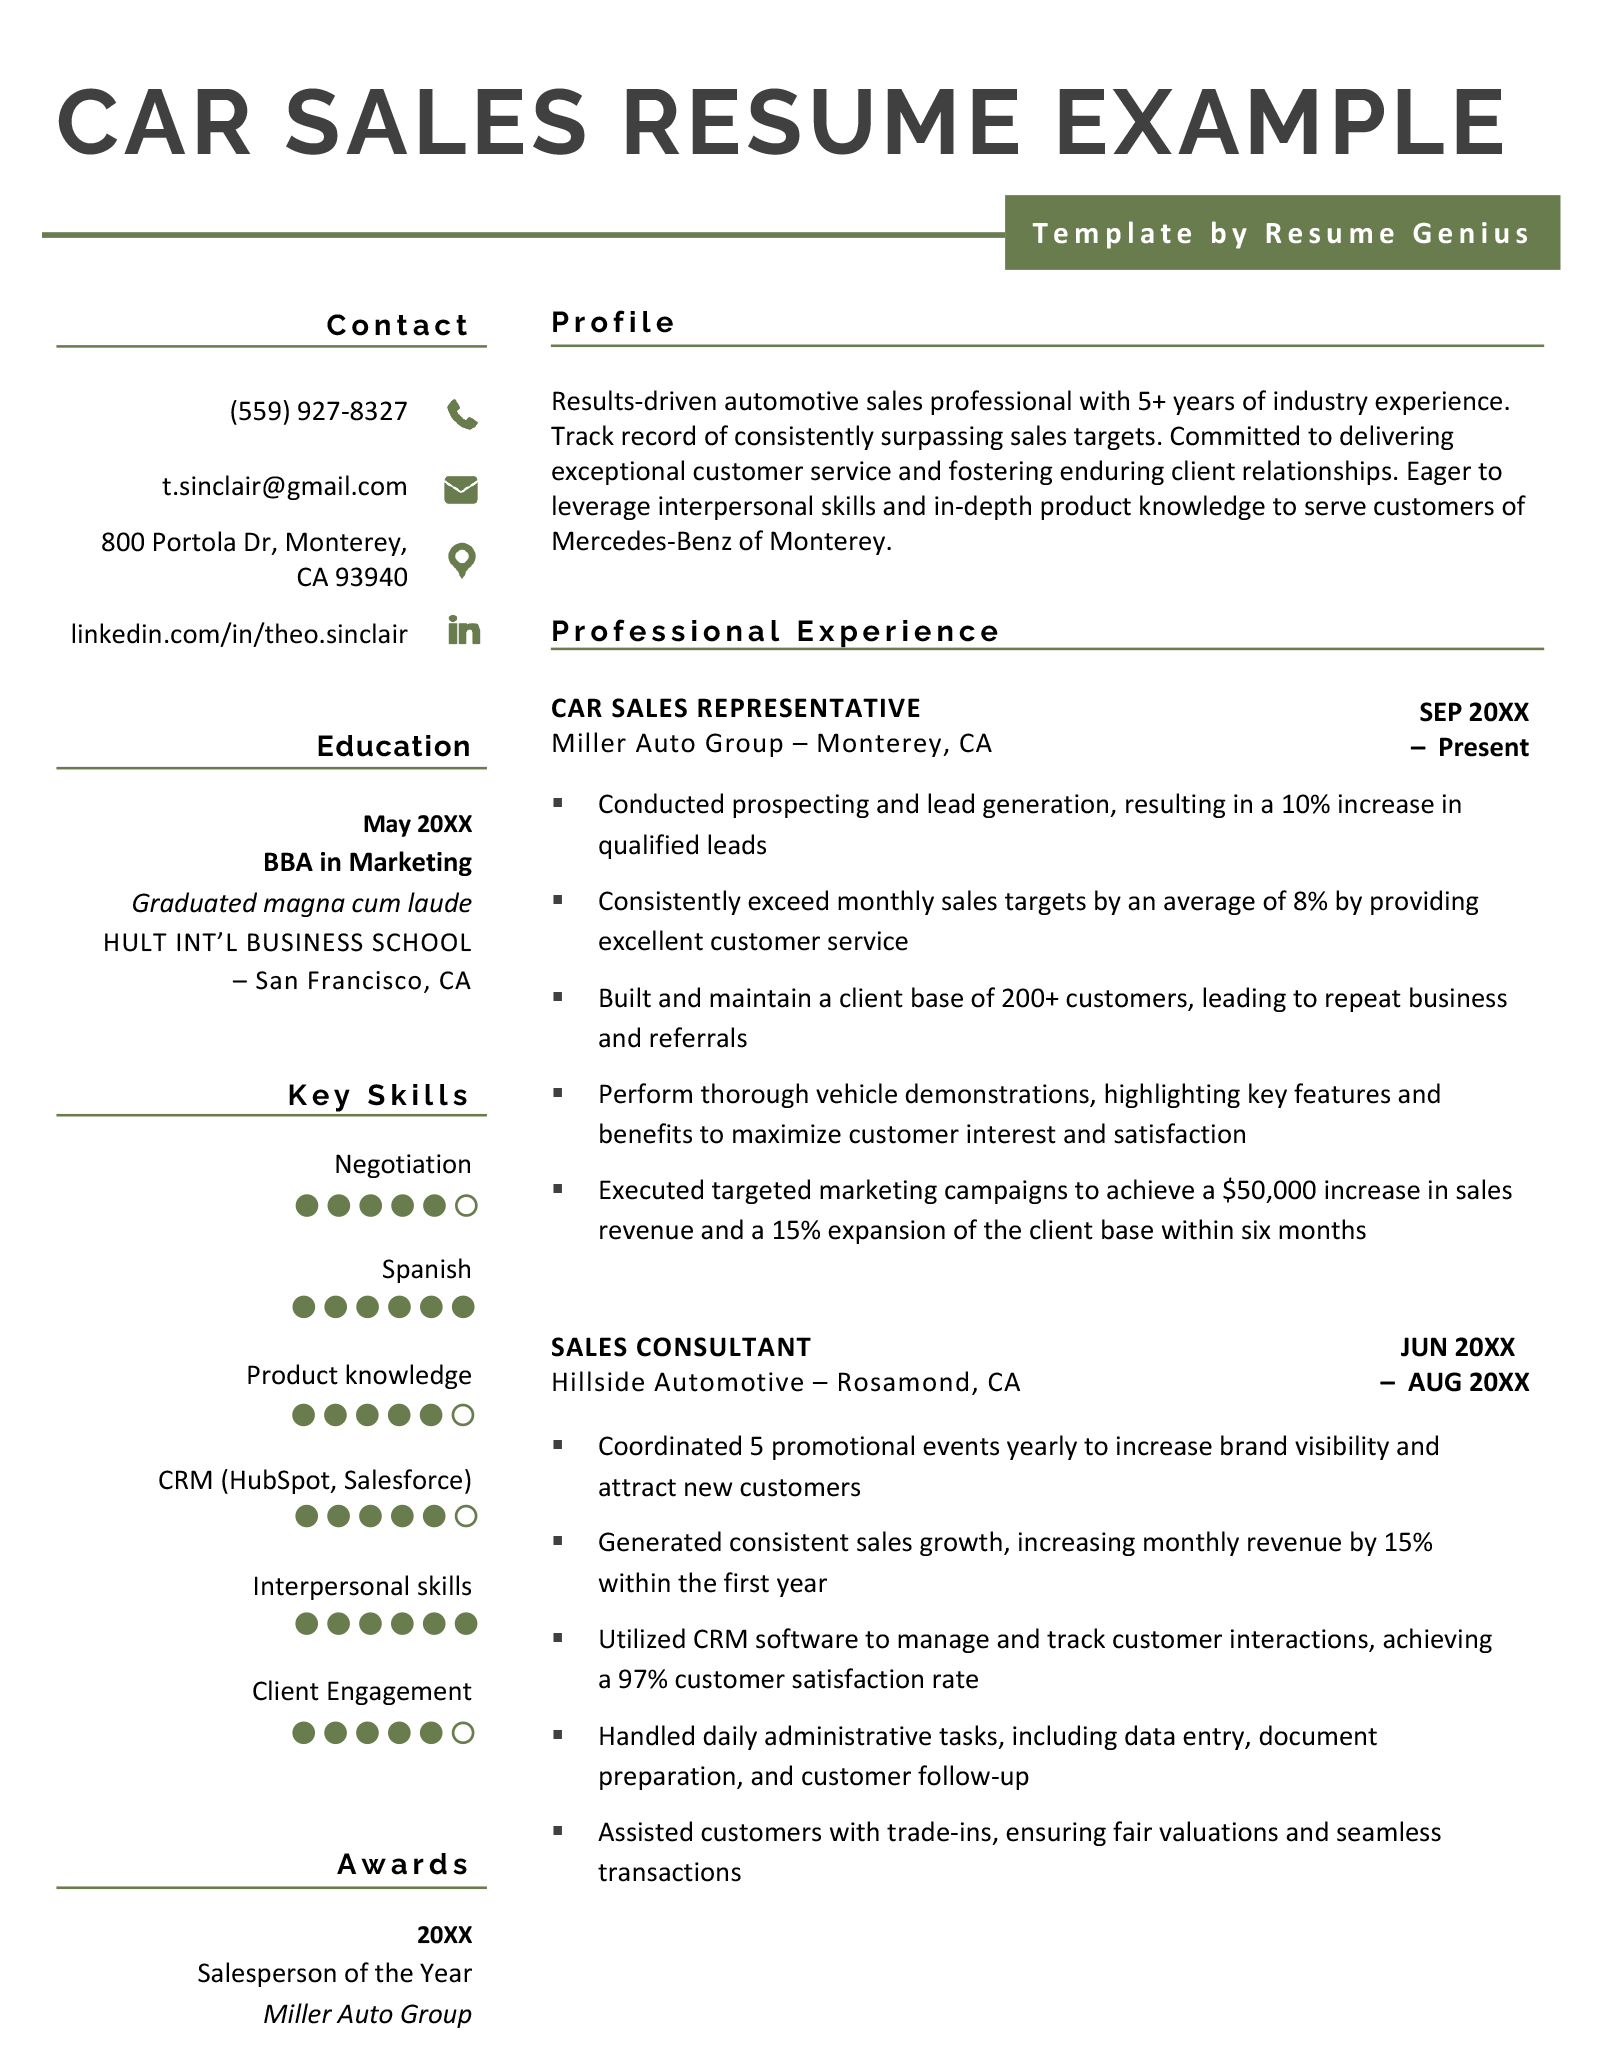 A car sales resume on a template with a green header written by a candidate with over five years of experience.